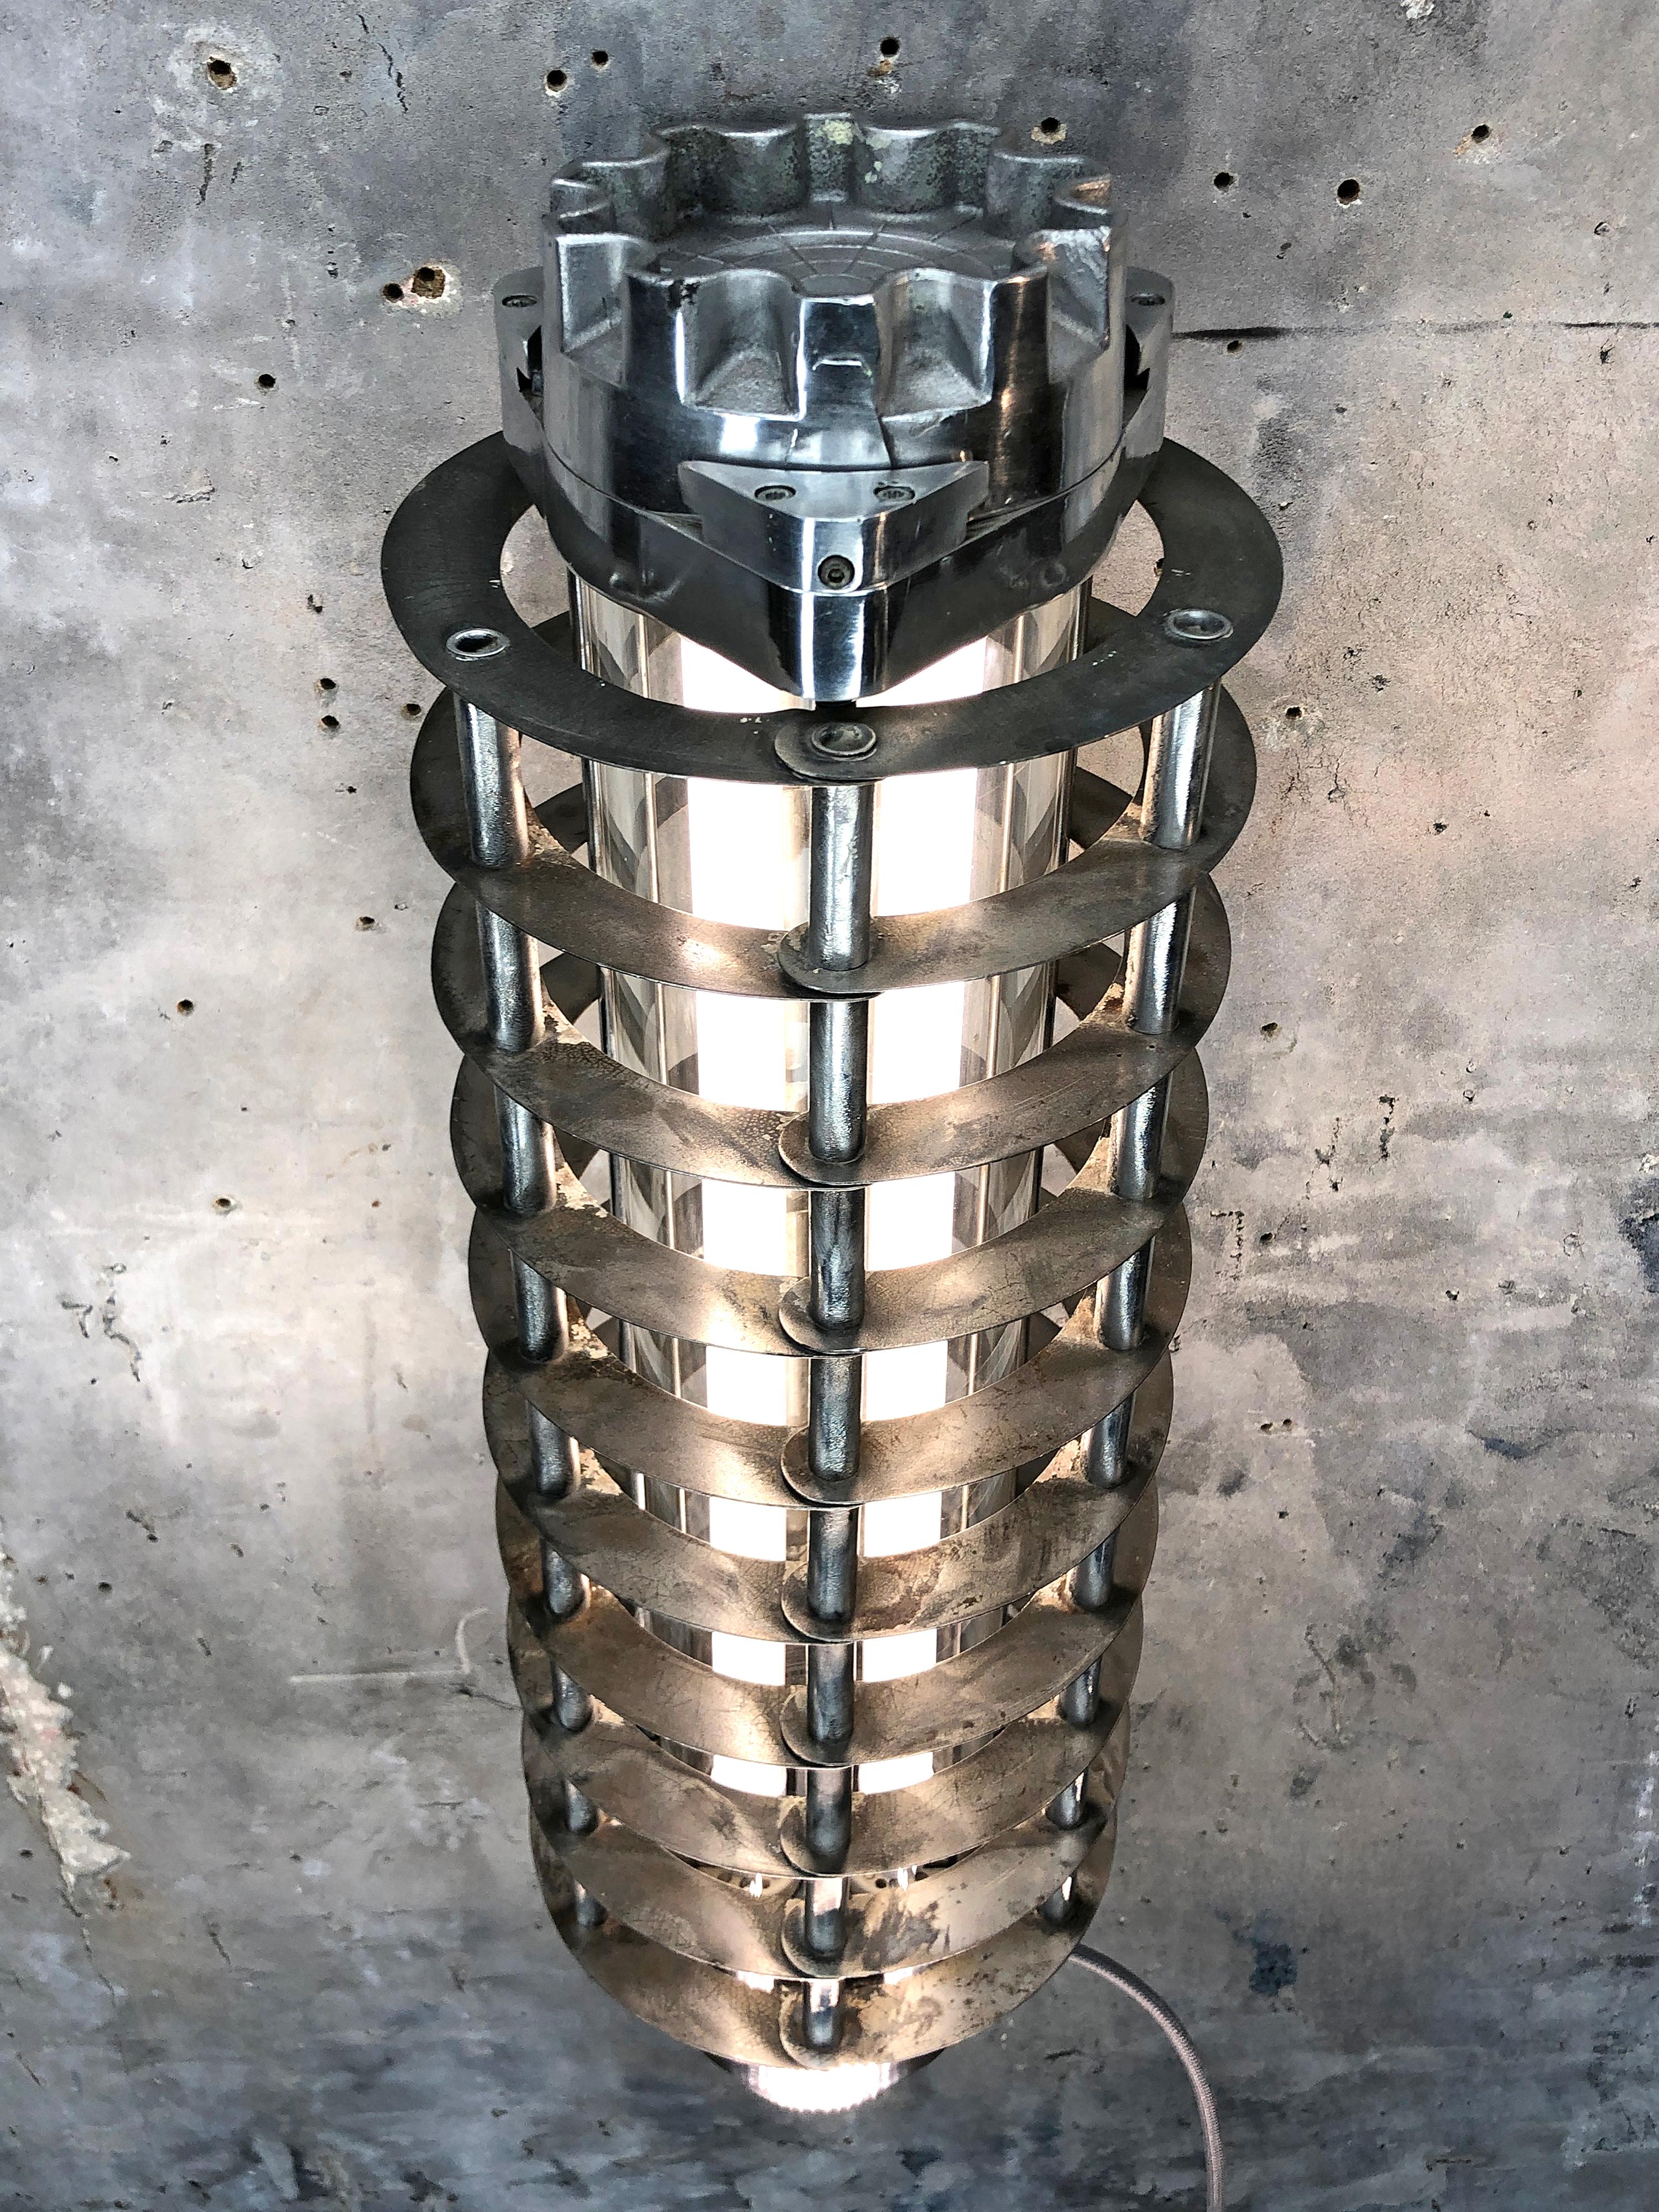 A retro Industrial aluminum wall-mounted flameproof striplight with protective cage by Wittenberg. Reclaimed from supertankers and military vessels then professionally stripped, restored and rewired by Loomlight in the UK.

This fixture is